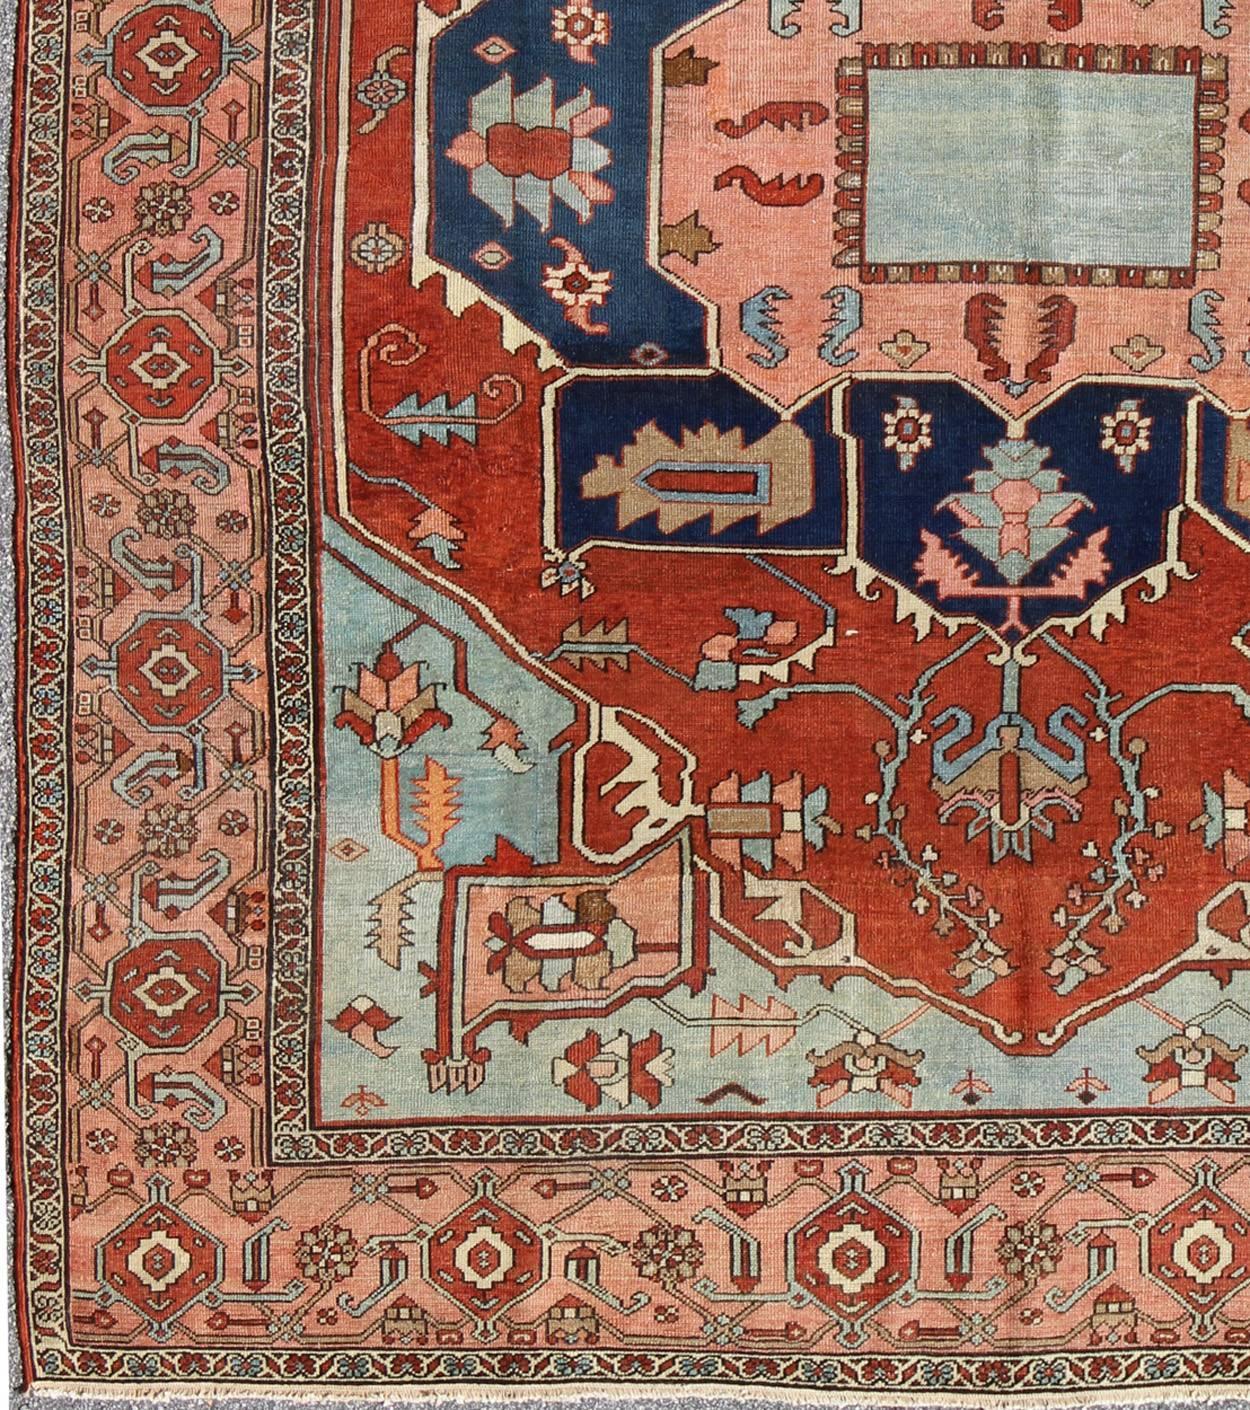 Antique Persian Serapi Carpet with Arabesque Detail and Vine-Scroll Border Keivan Woven Arts / Rug / KBE-20, country of origin / type: Iran /Heriz, circa 1910. 
Measures: 9'7 x 11'4
Serapi rugs are known as the finest rugs produced in the Heriz